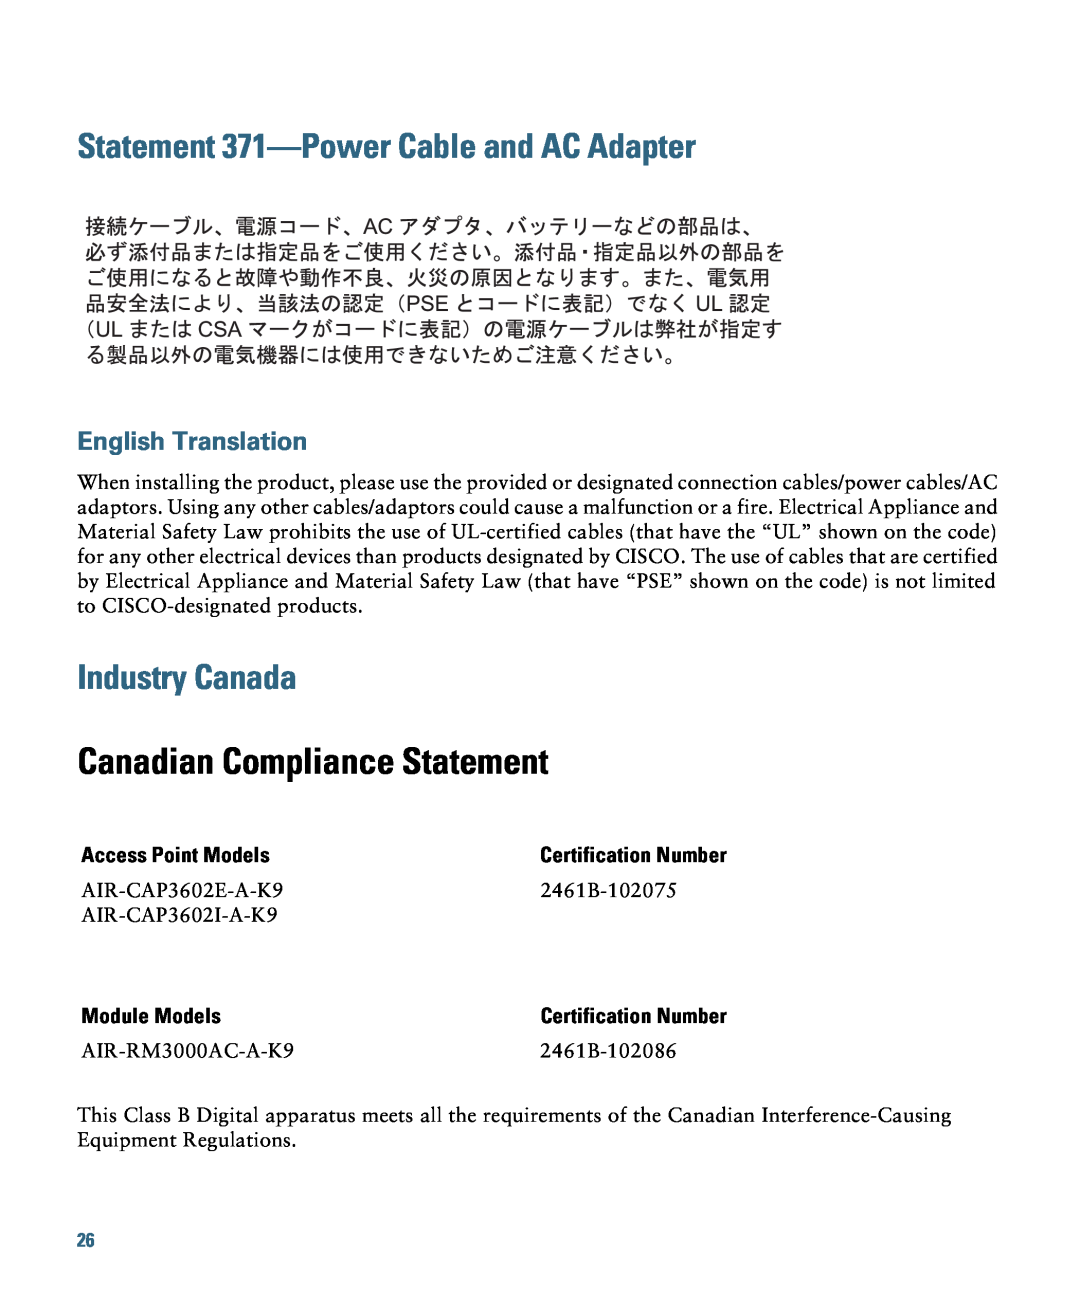 Cisco Systems AIRCAP3602EAK9 Statement 371-Power Cable and AC Adapter, Industry Canada, Canadian Compliance Statement 